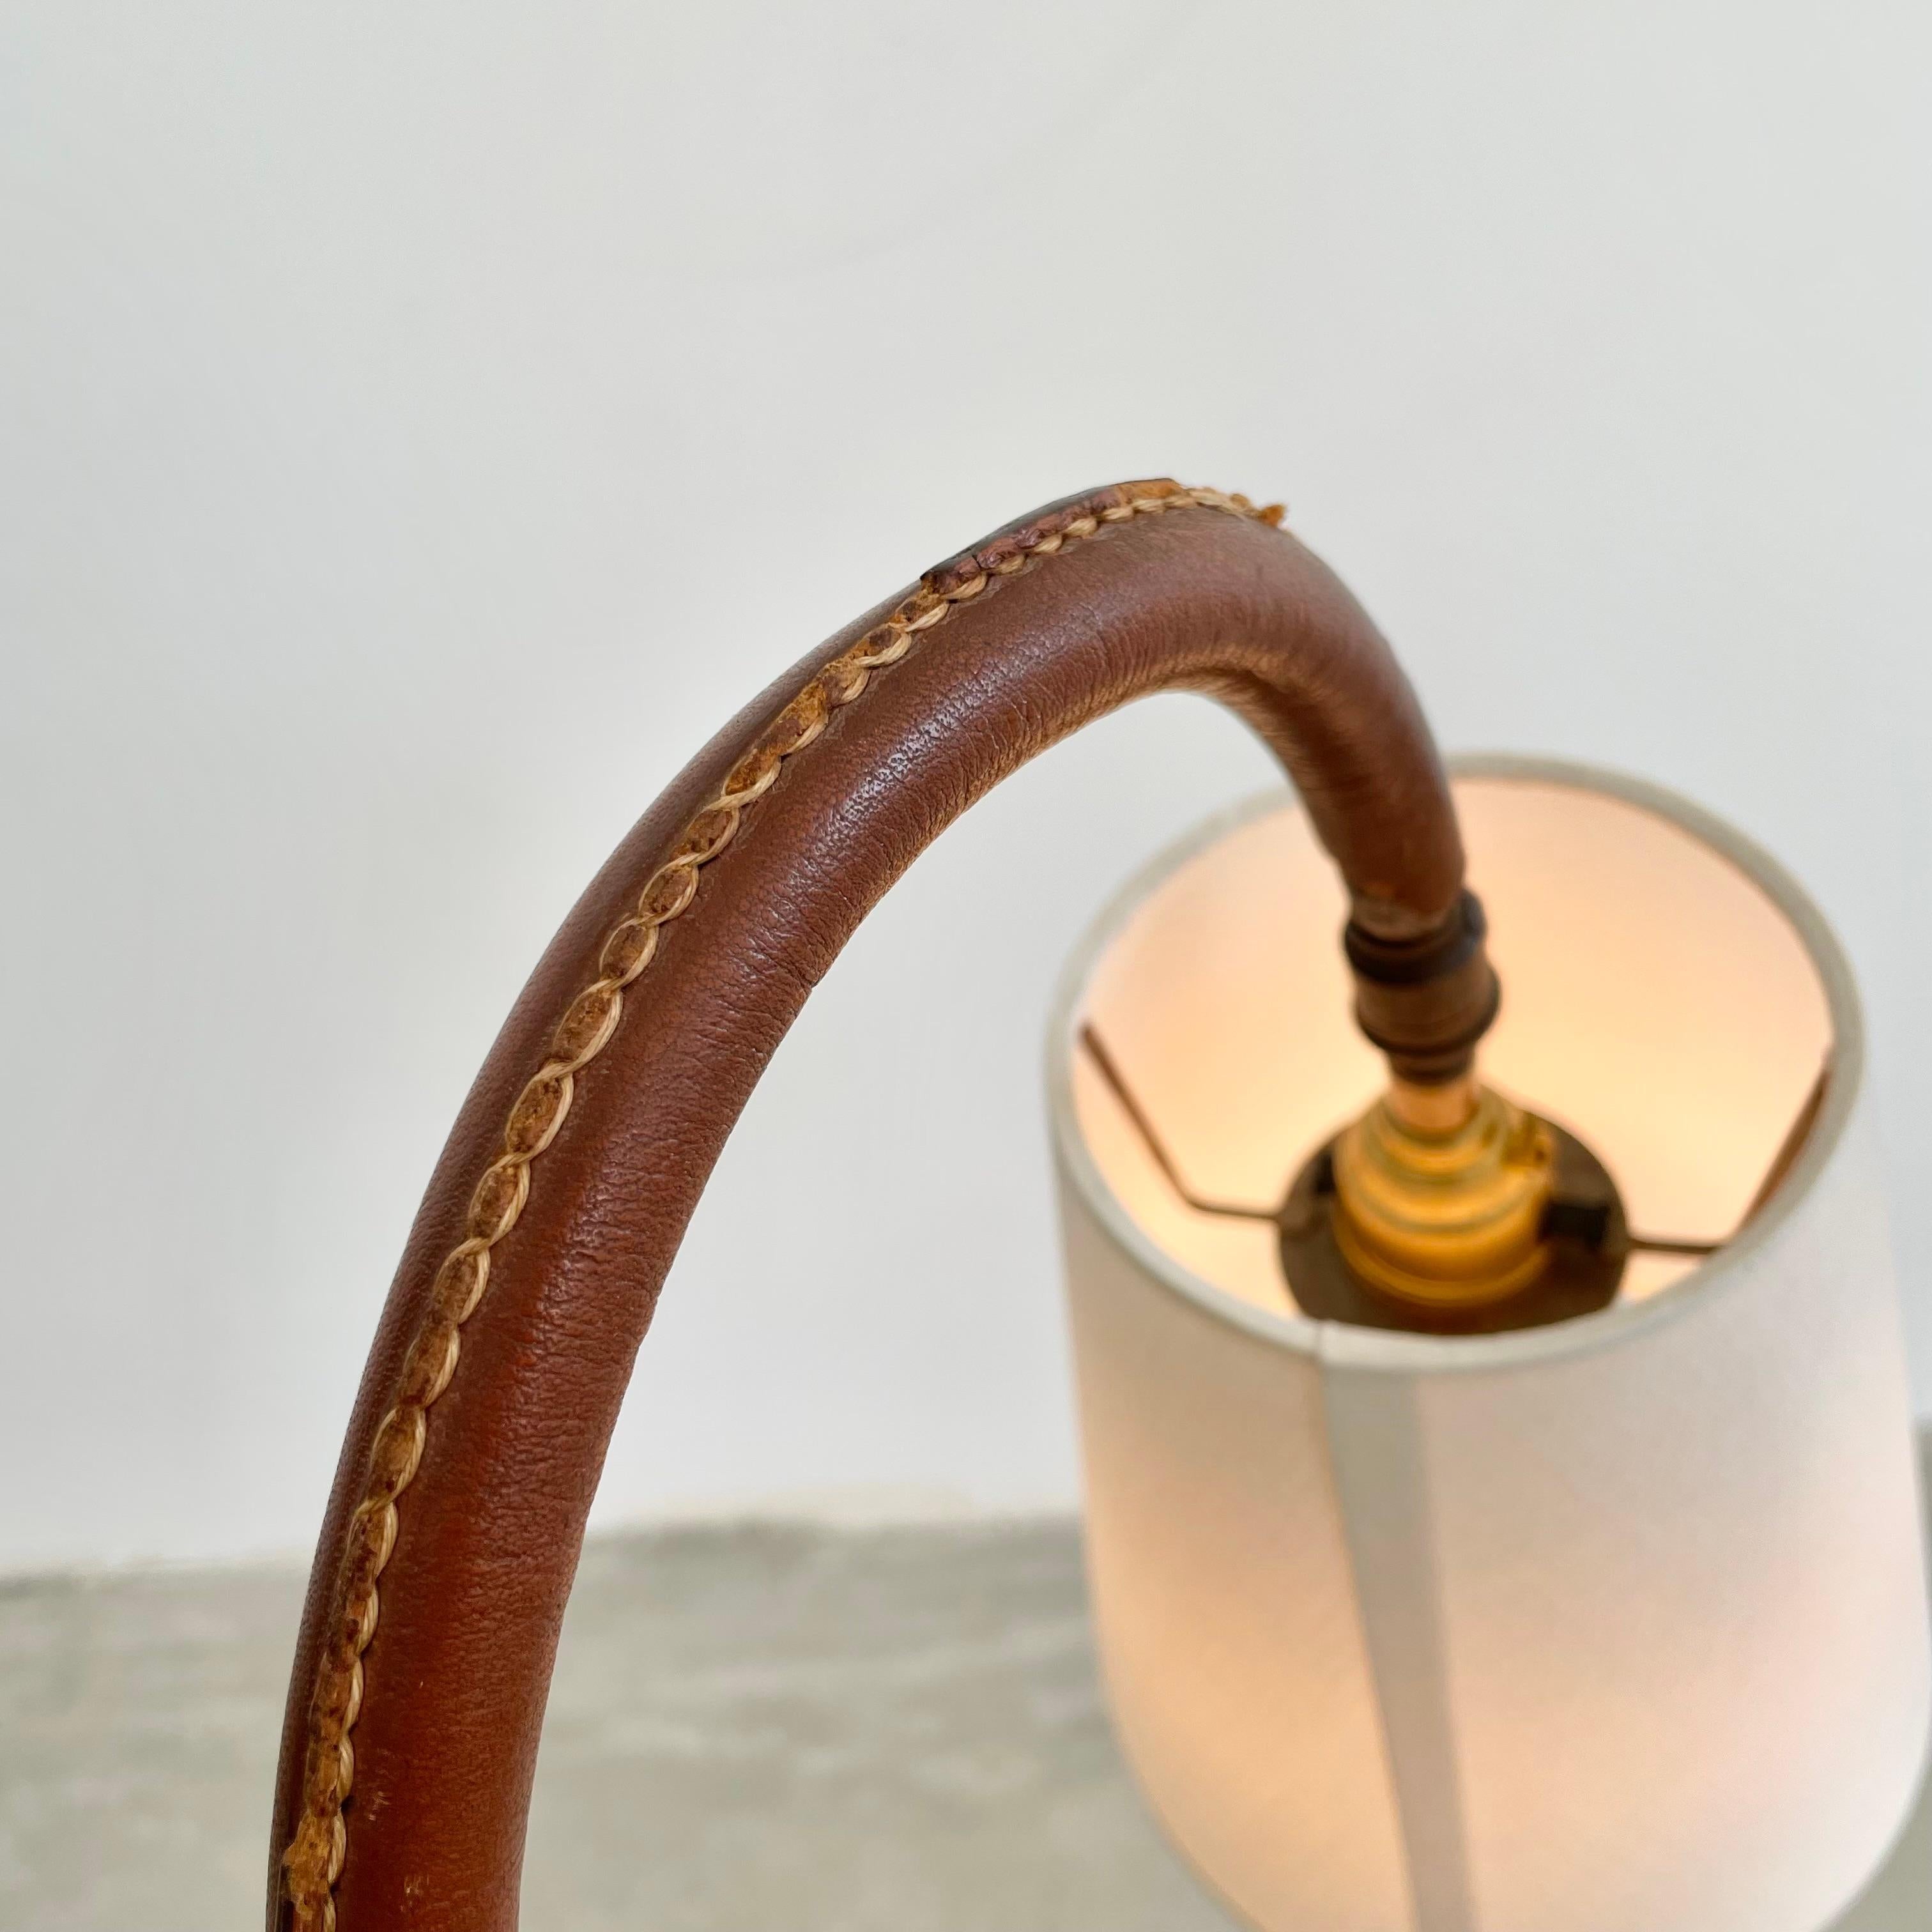 Jacques Adnet Leather Table Lamp with Built-in Catchall, 1950s France In Good Condition For Sale In Los Angeles, CA